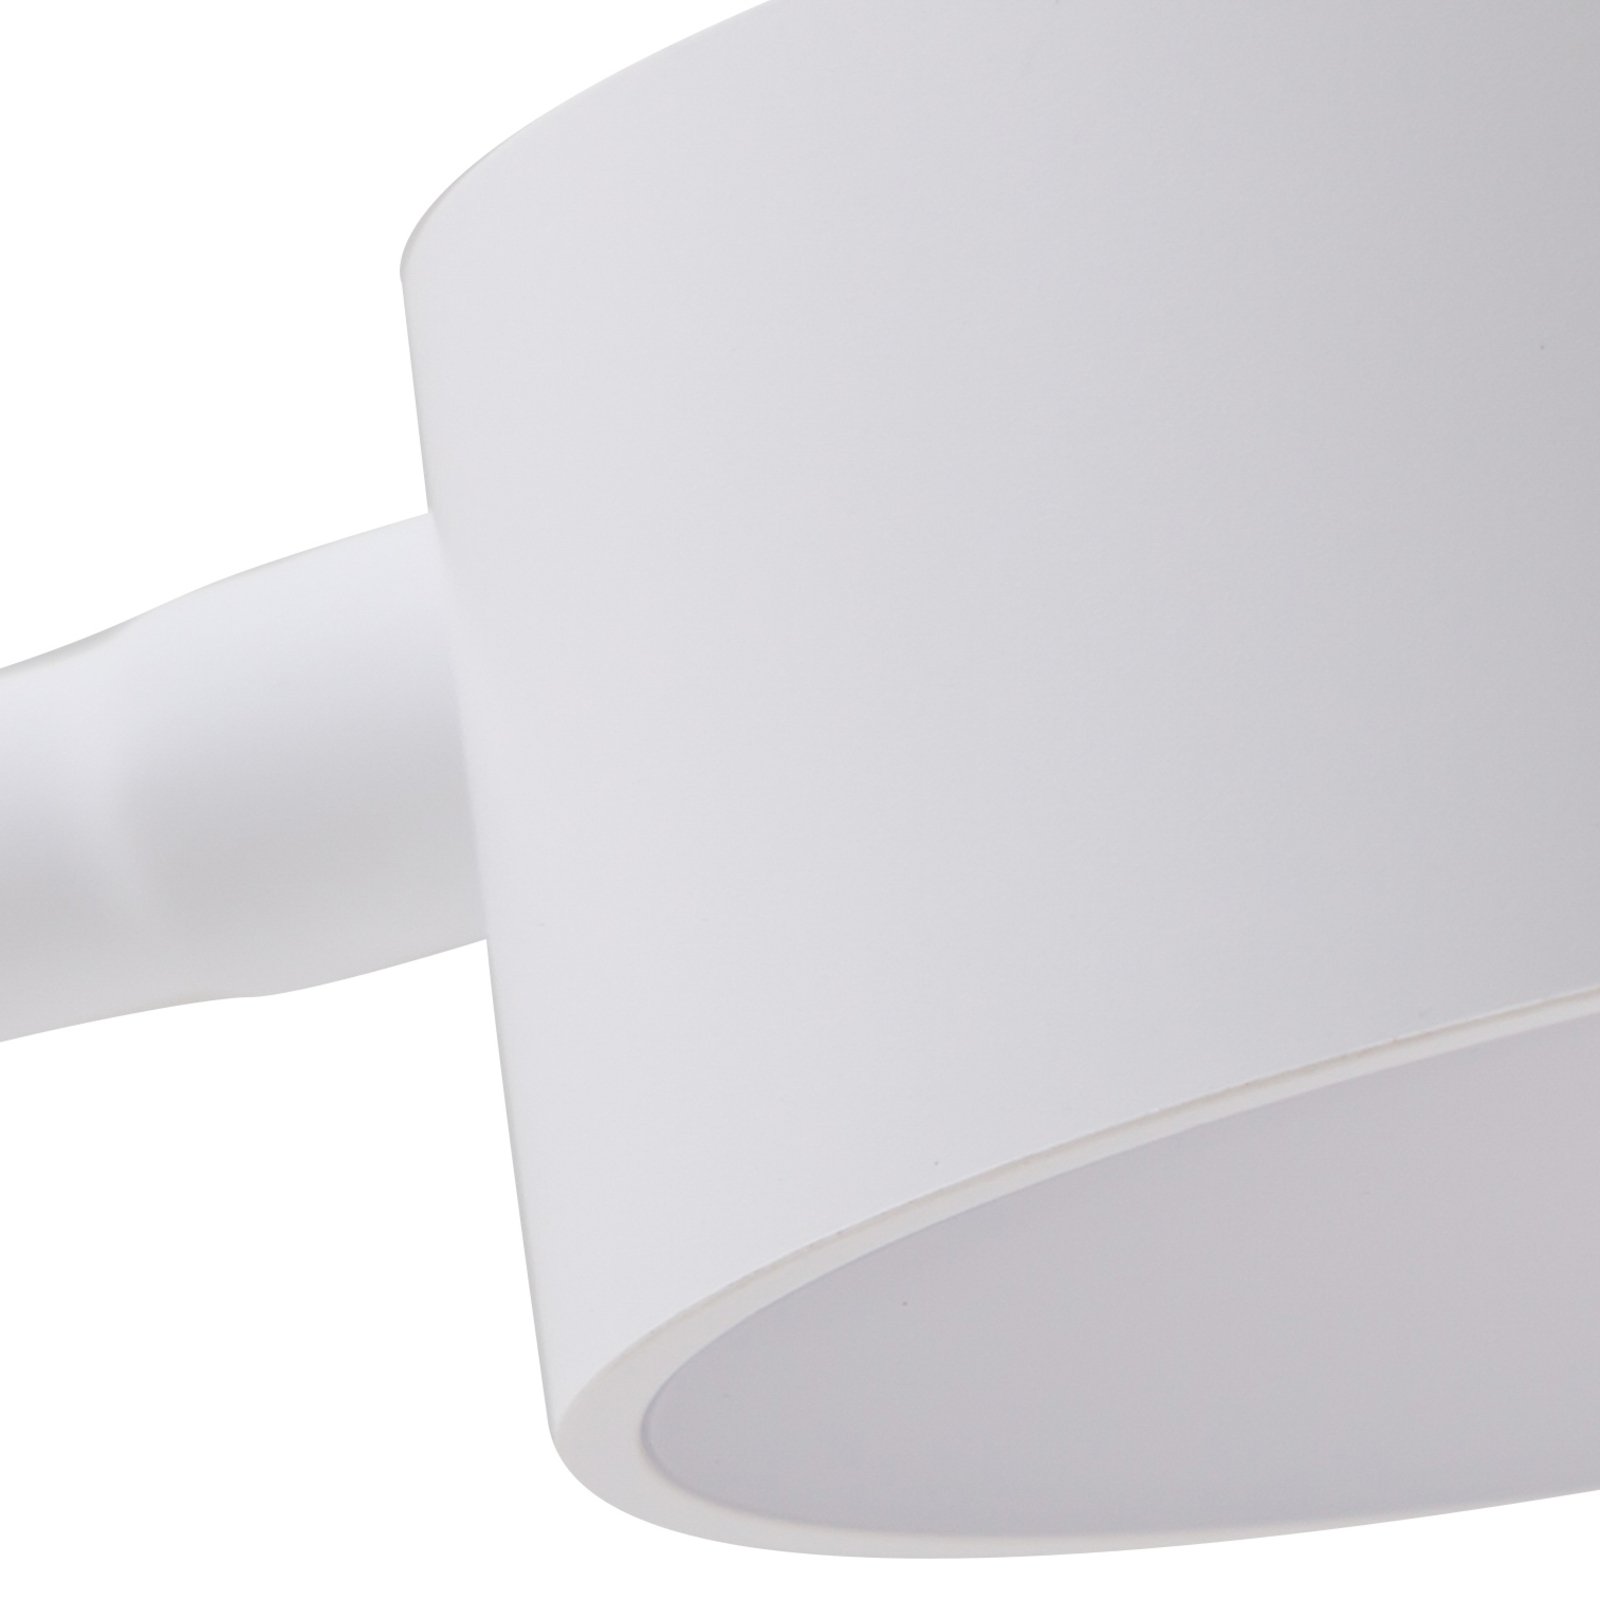 Lindby LED table lamp Maori, white, CCT, dimmable, USB